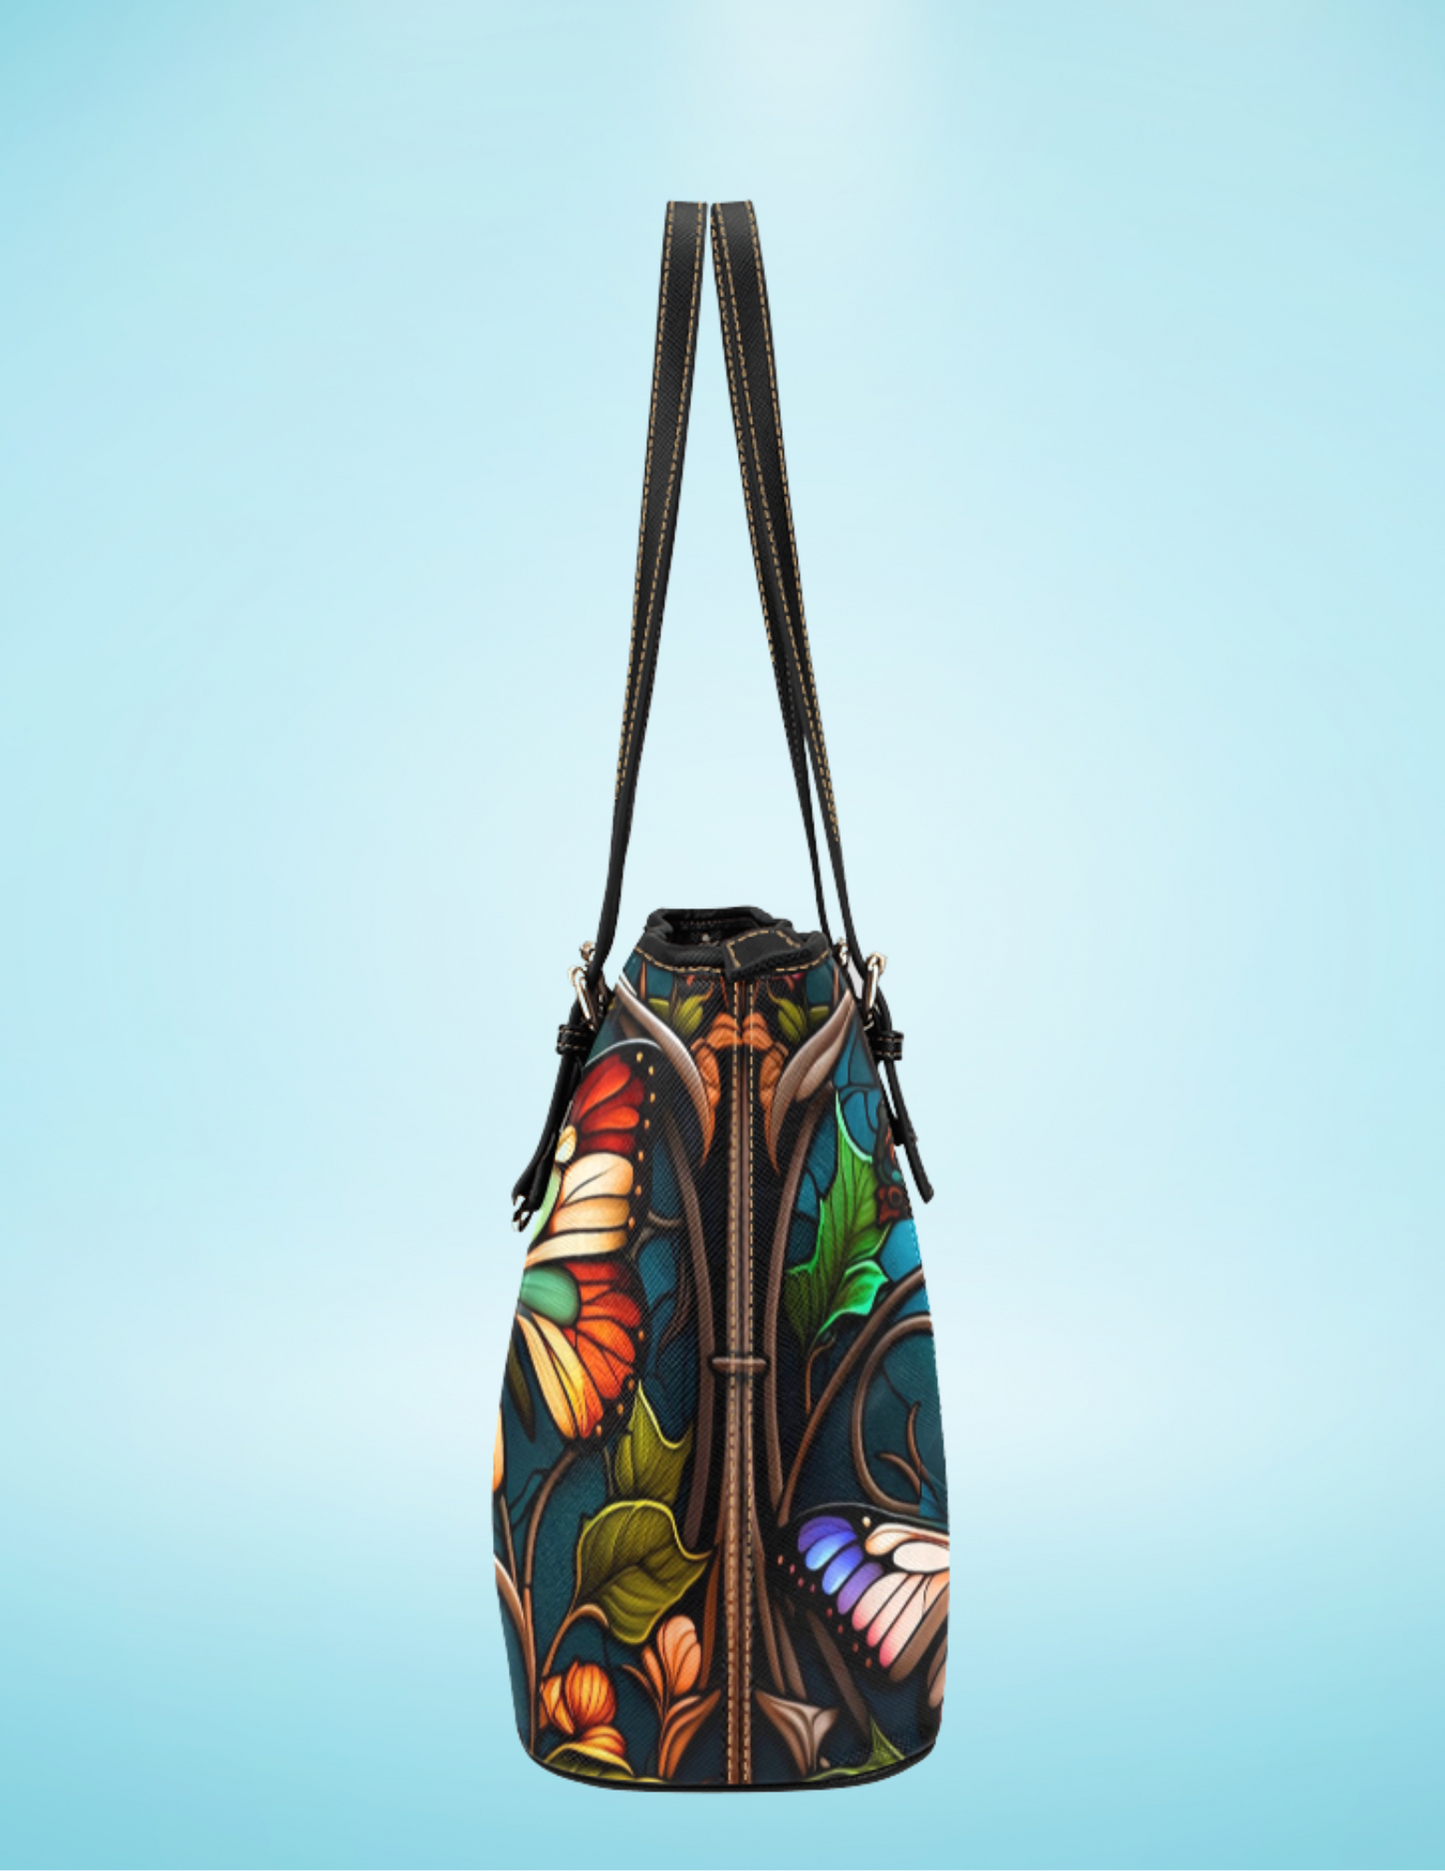 Awesome Butterfly Tote Bag